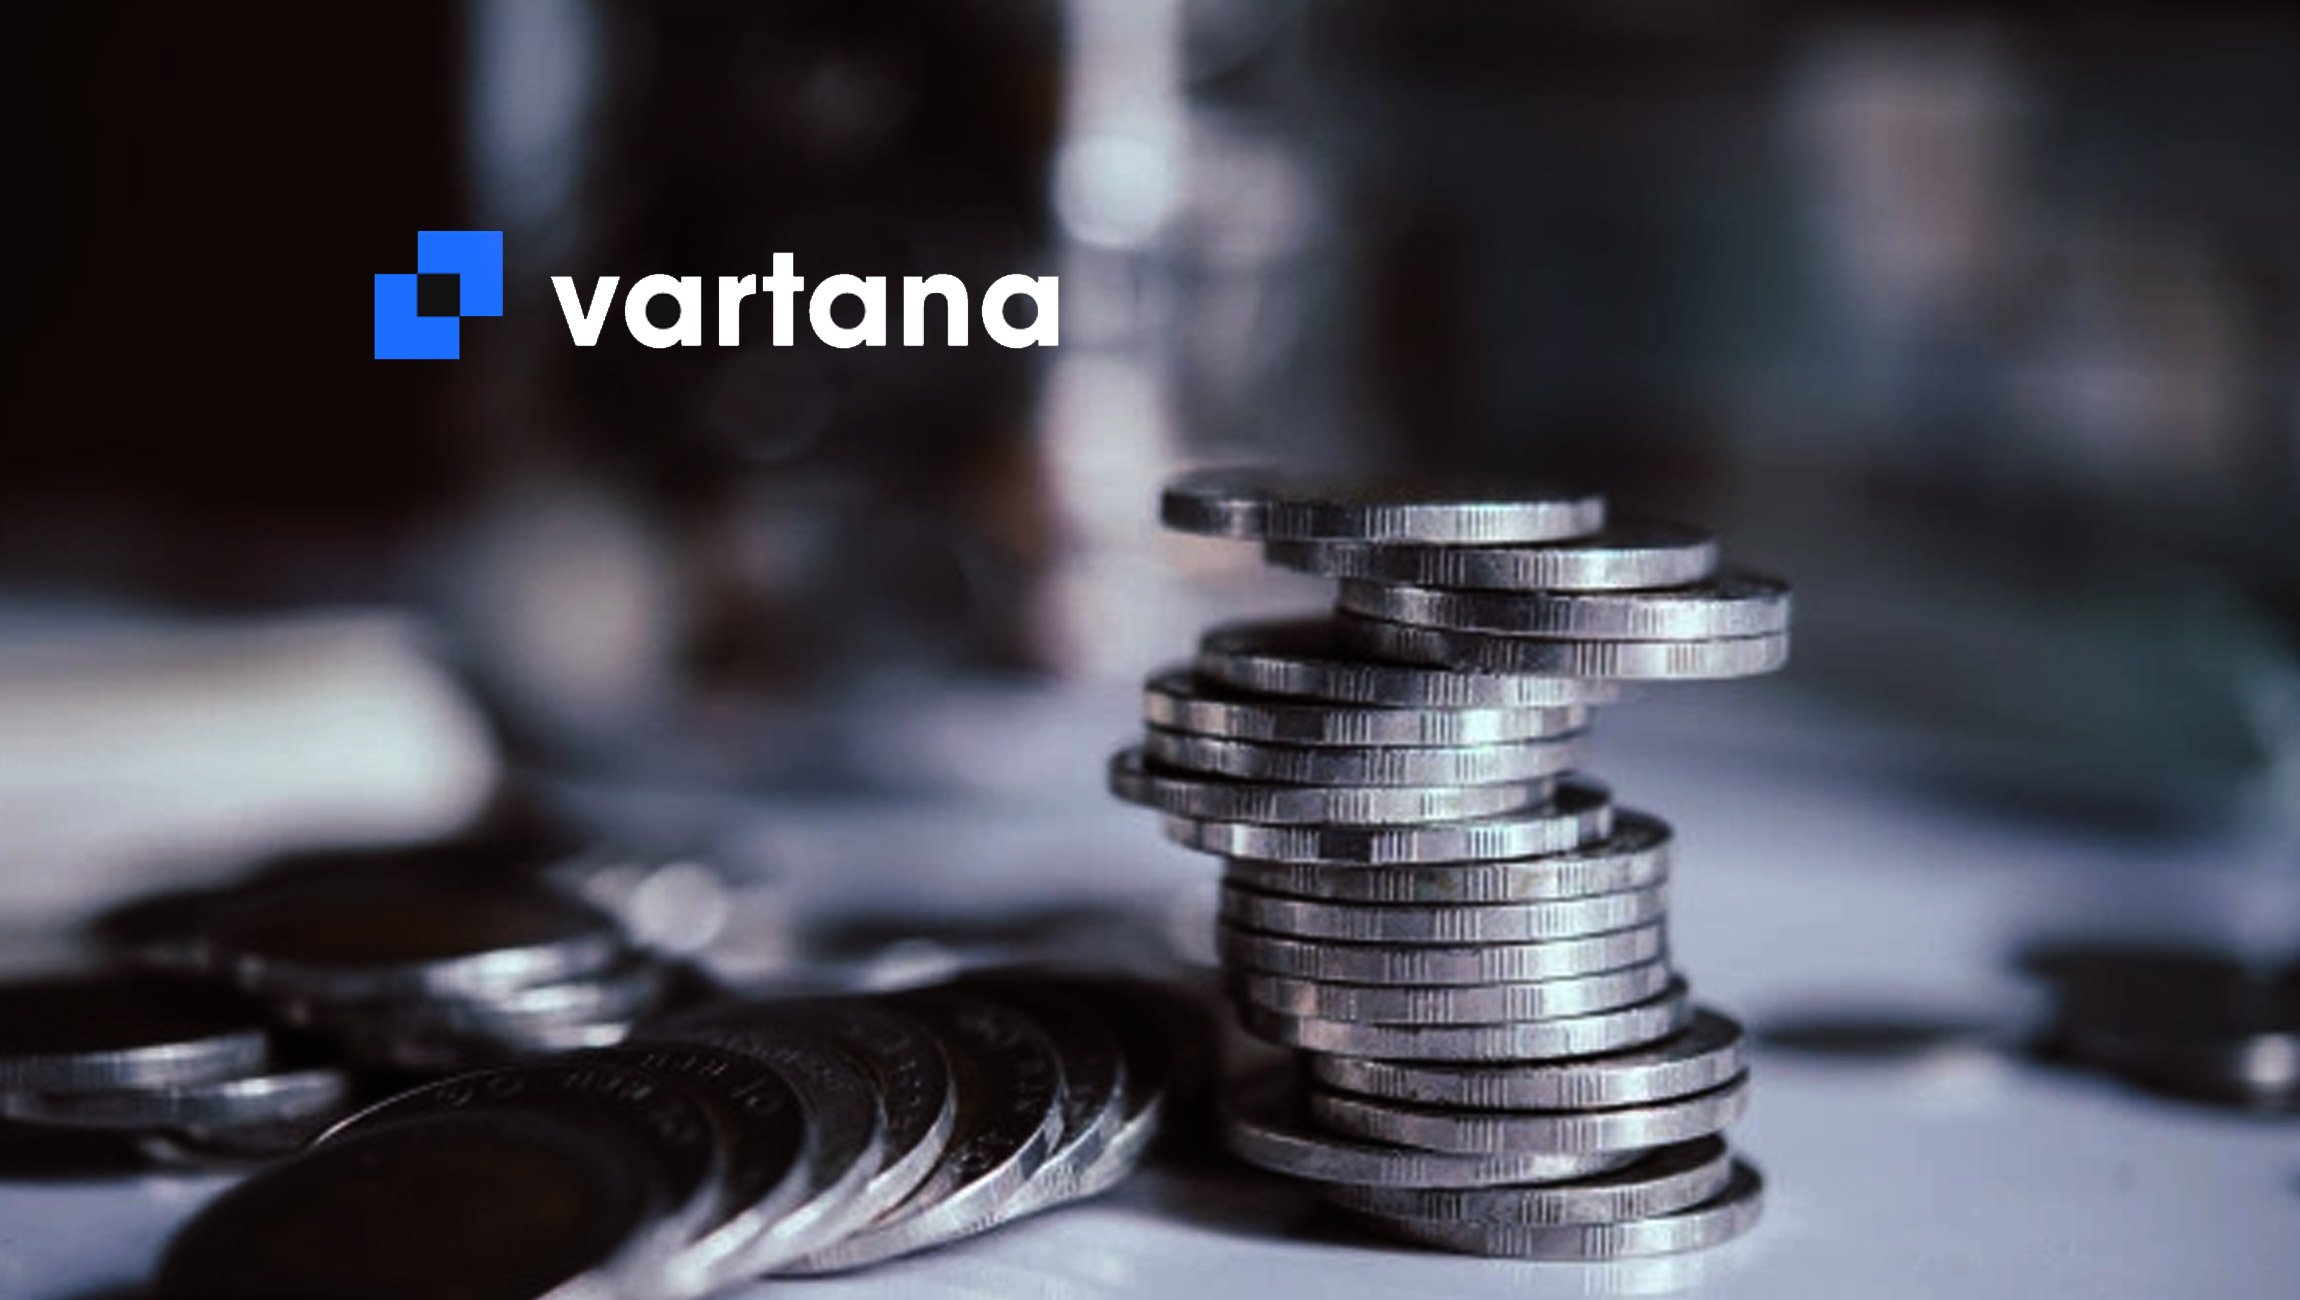 Vartana Launches With $57 Million in Seed Funding to Be the “Affirm for B2B”